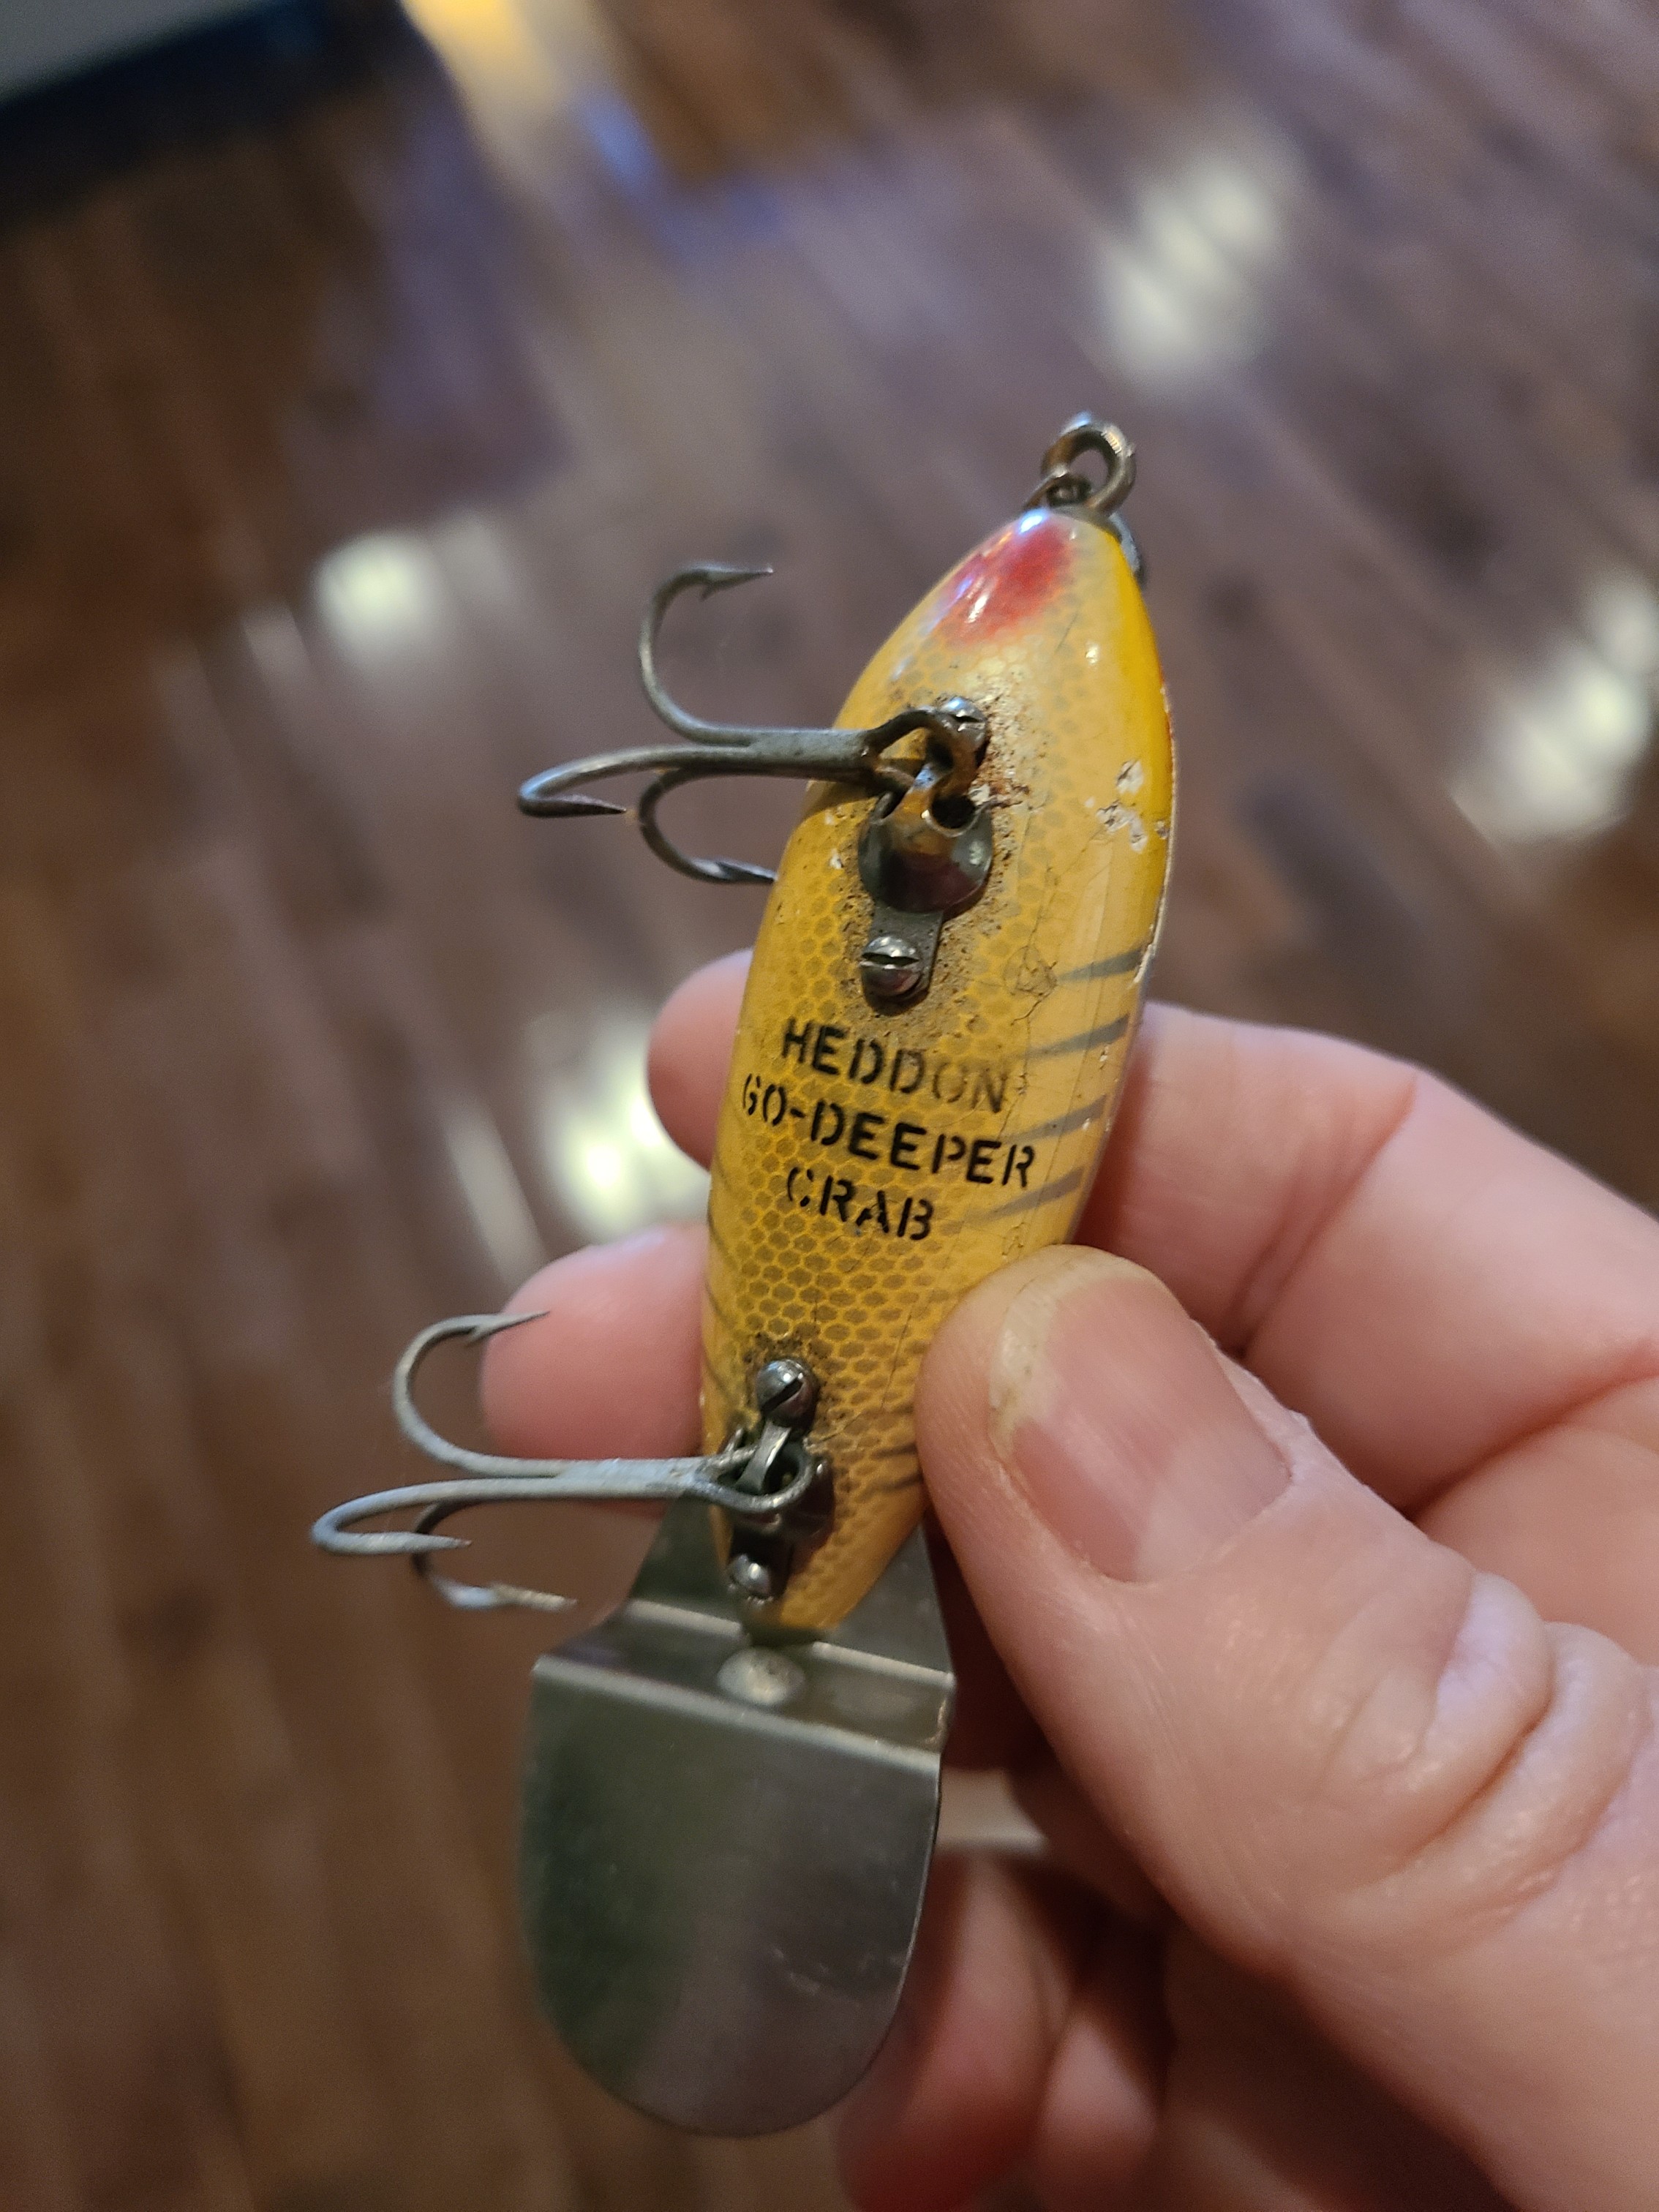 OPINION, PUTTHOFF Vintage lures bring on bass attacks